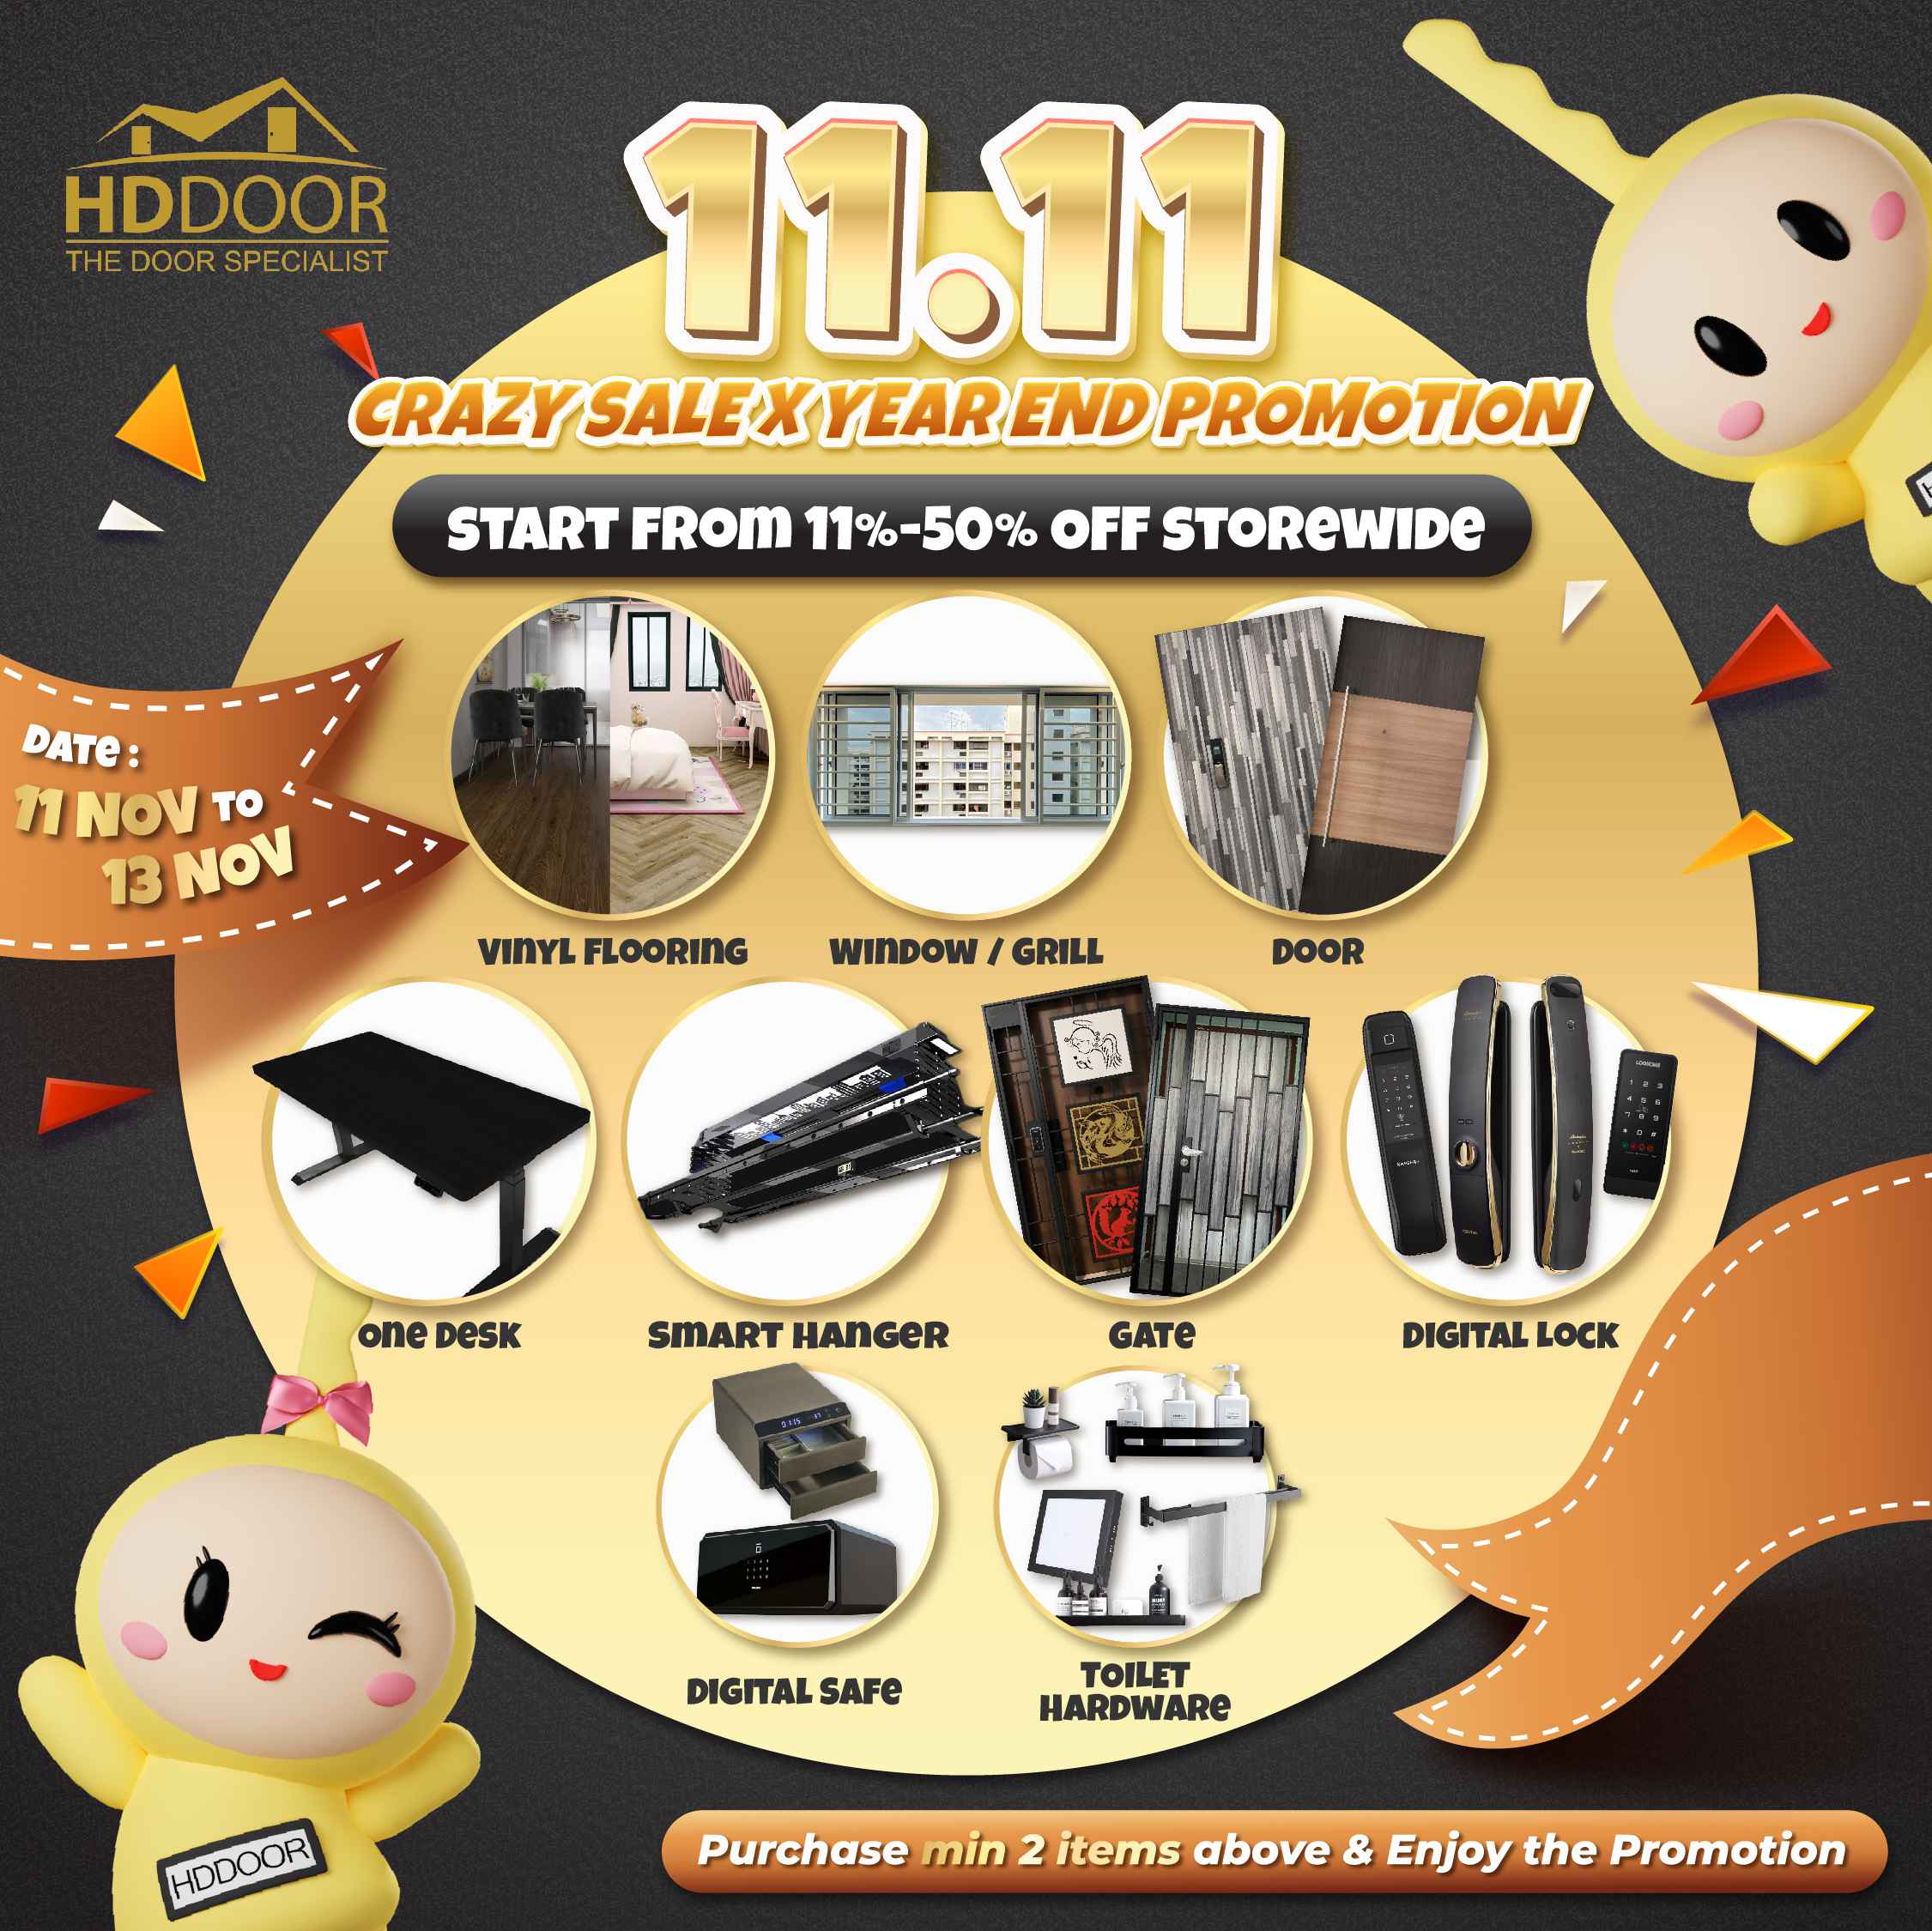 11.11 Crazy Sale & Year-end promotion on HDDoor, Woodlands, North West, Singapore